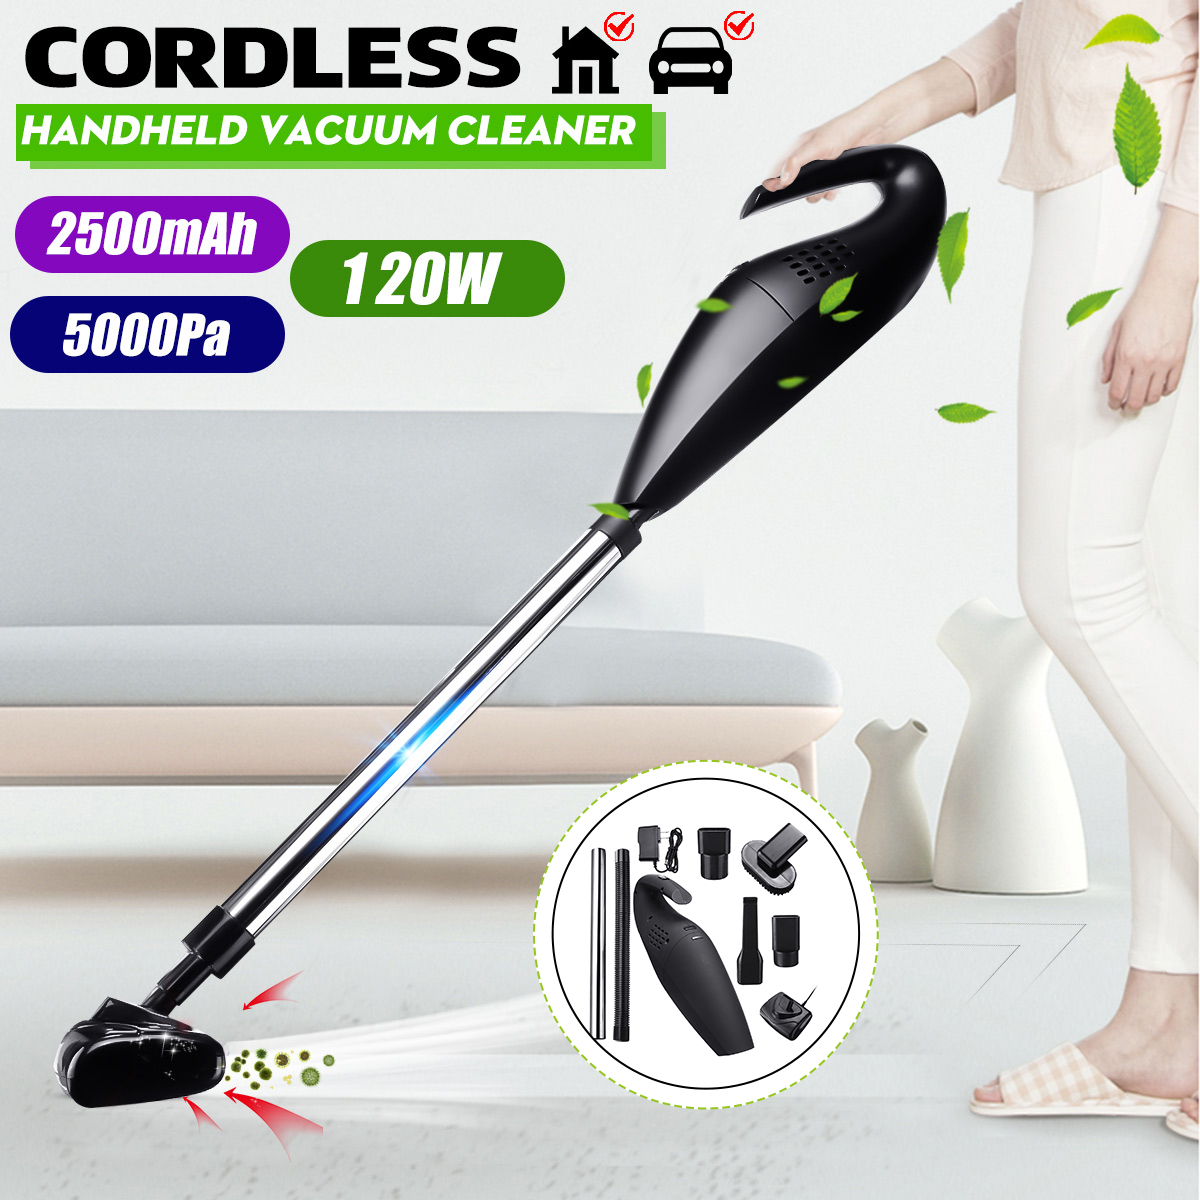 110-240V-120W-Handheld-Car-Wireless-Vacuum-Cleaner-With-High-Power-Dual-Purpose-Wet--Dry-Portable-Re-1581227-1